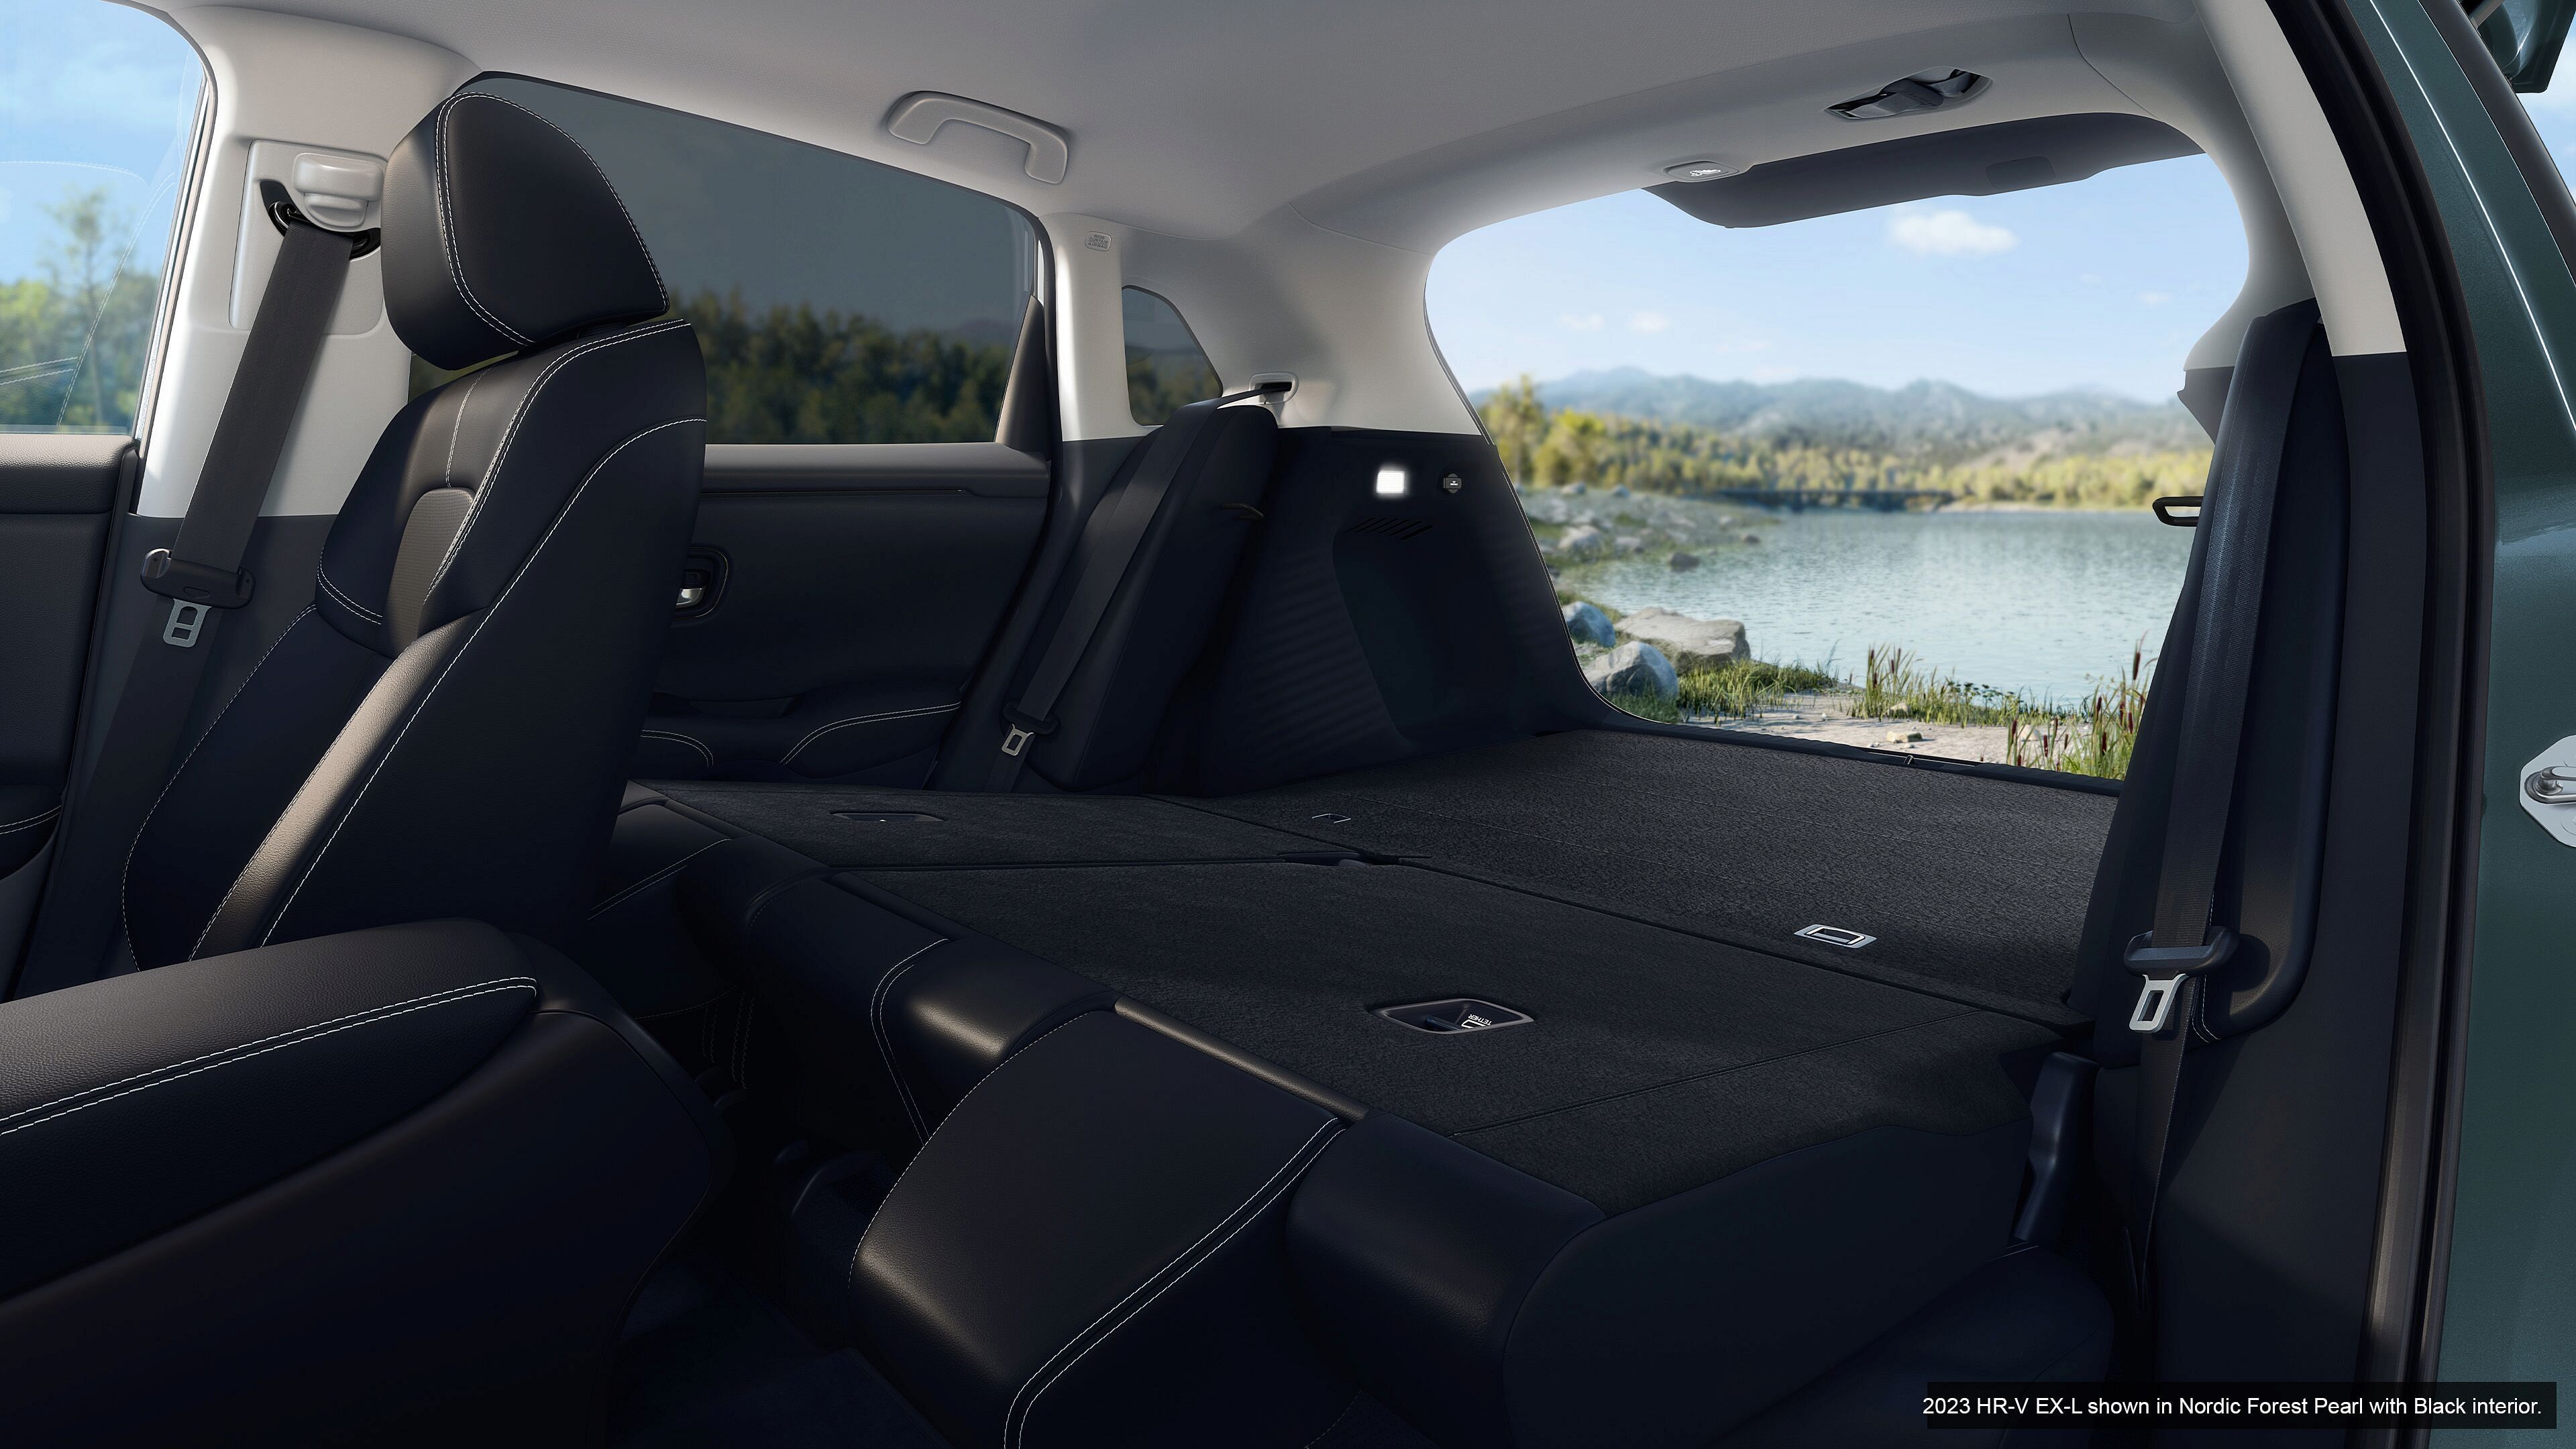 Folded rear seats in Nordic Forest Pearl Honda HR-V EX-L 2023, open trunk. Lake in background